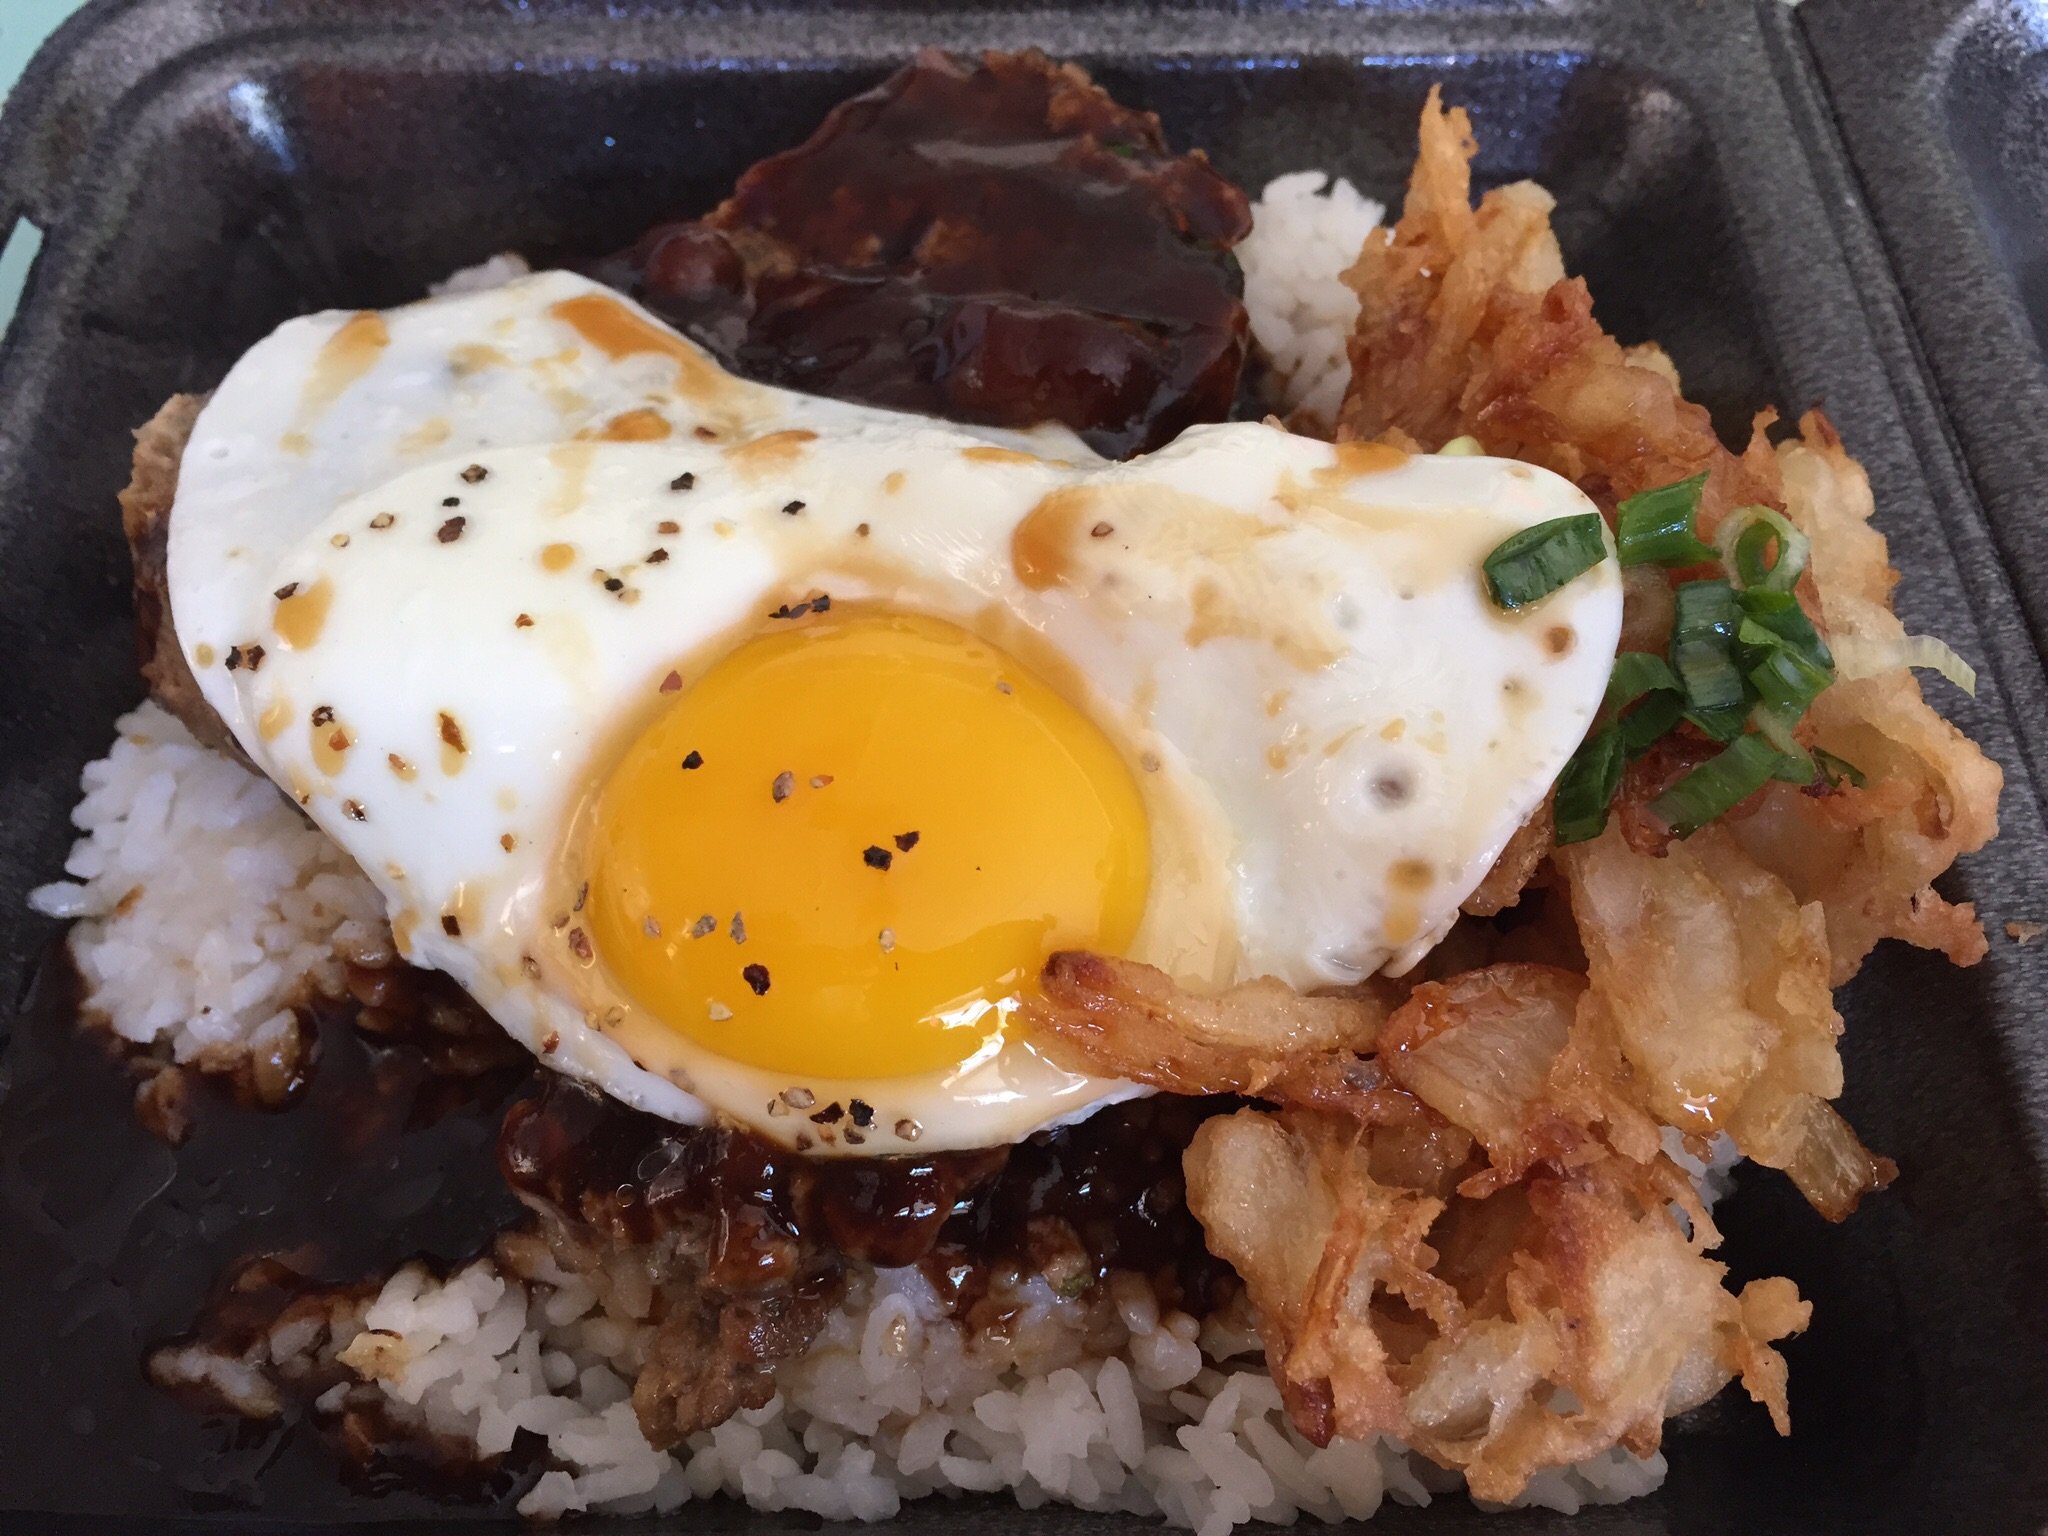 HI Steaks - #5 Combo, Top Sirloin ground steak loco moco with a 24 oz drink. 